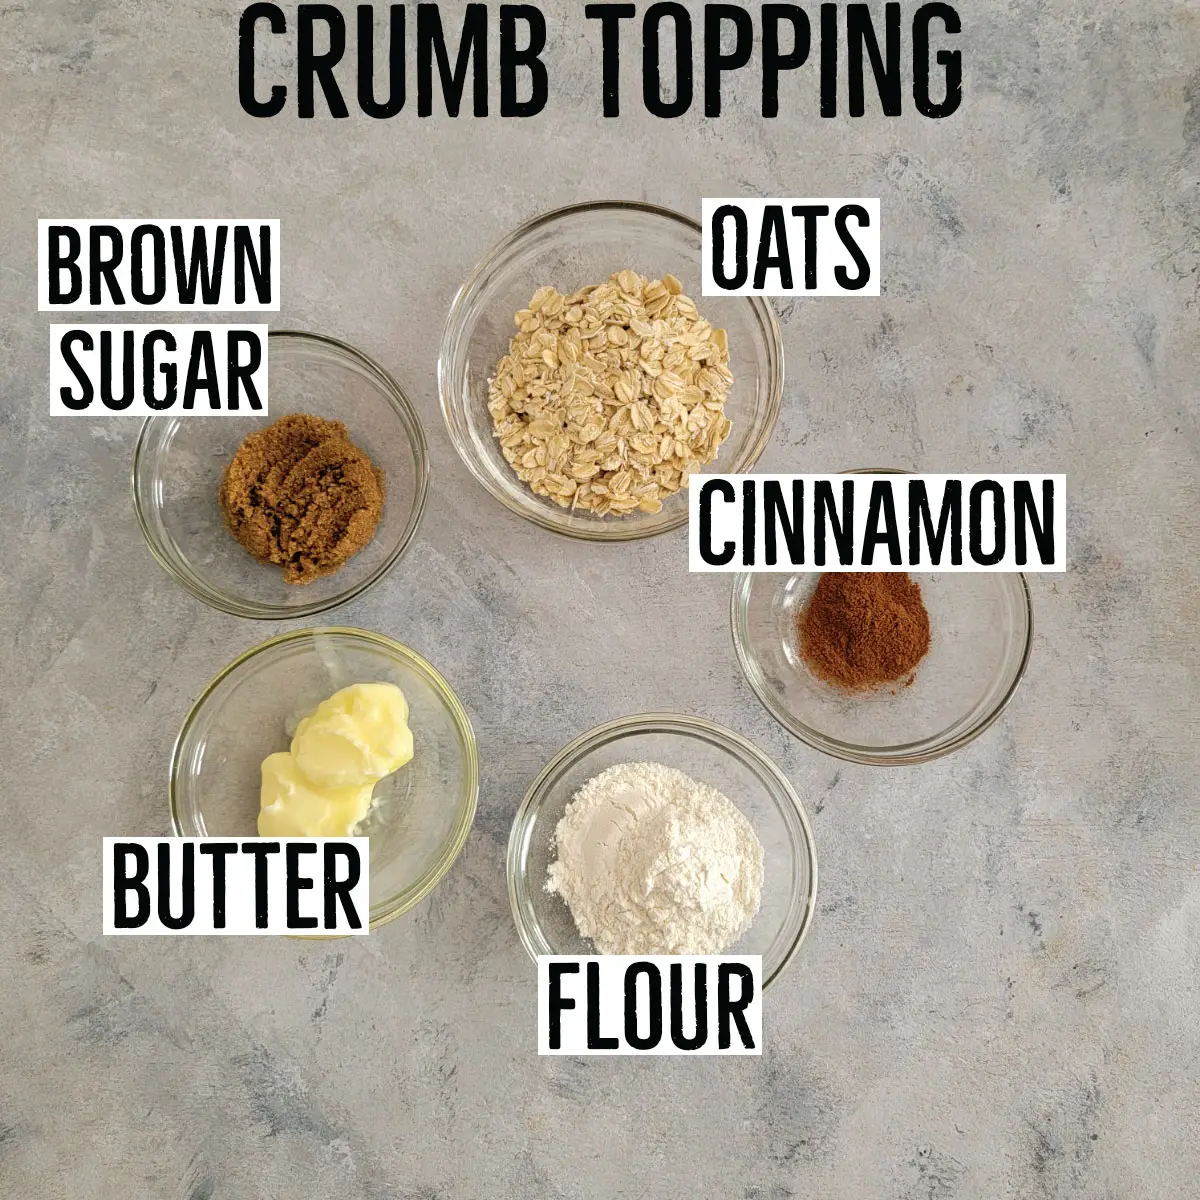 Crumb topping ingredients labeled in prep bowls - brown sugar, oats, cinnamon, butter and flour.